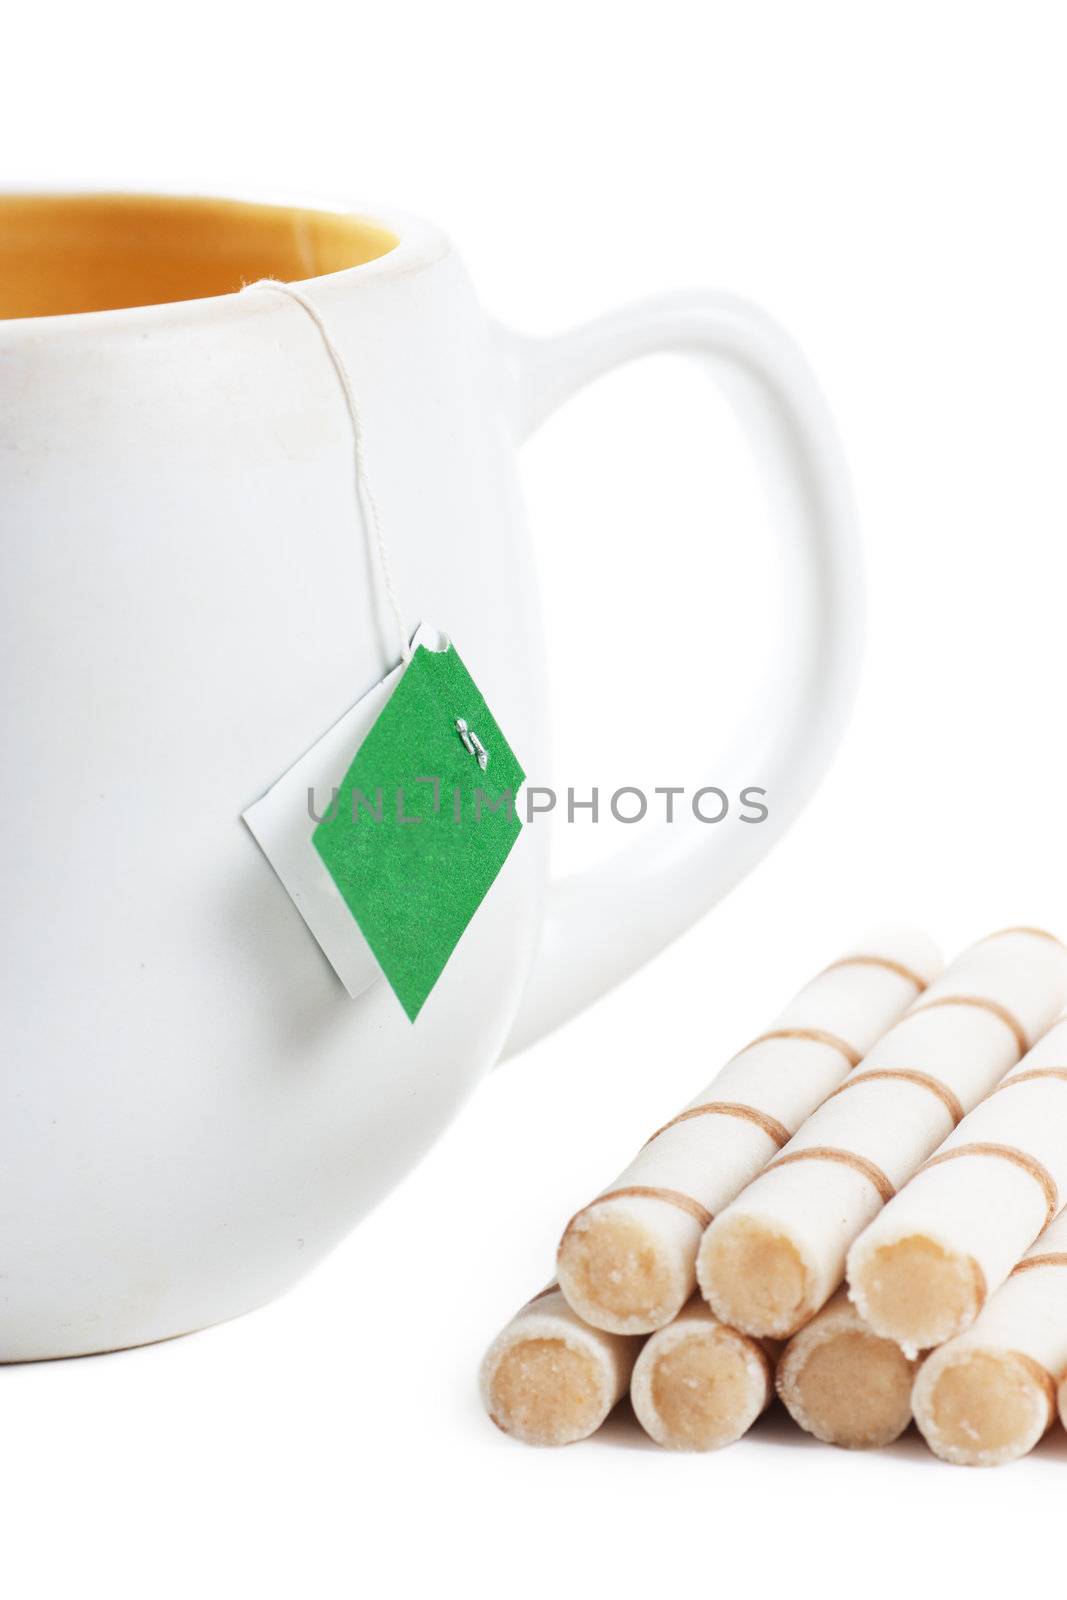 Closeup view of handle of cup and sweets over white background